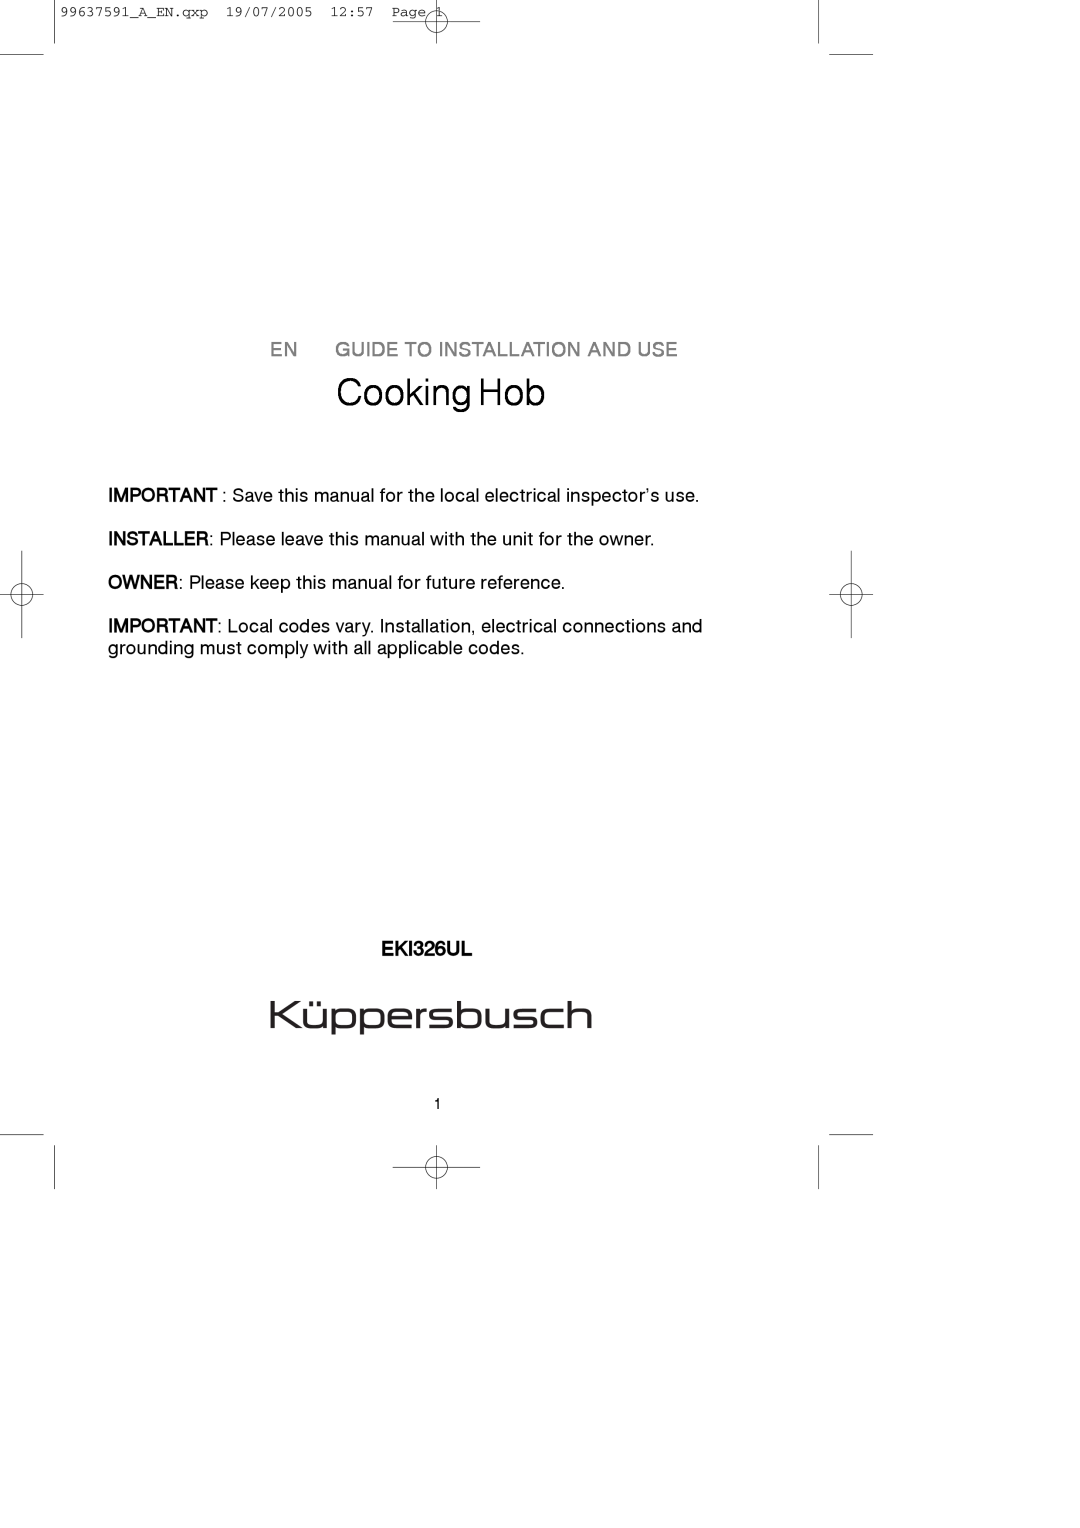 Kuppersbusch USA EKI326UL manual Cooking Hob, En Guide To Installation And Use, 99637591AEN.qxp 19/07/2005 1257 Page 